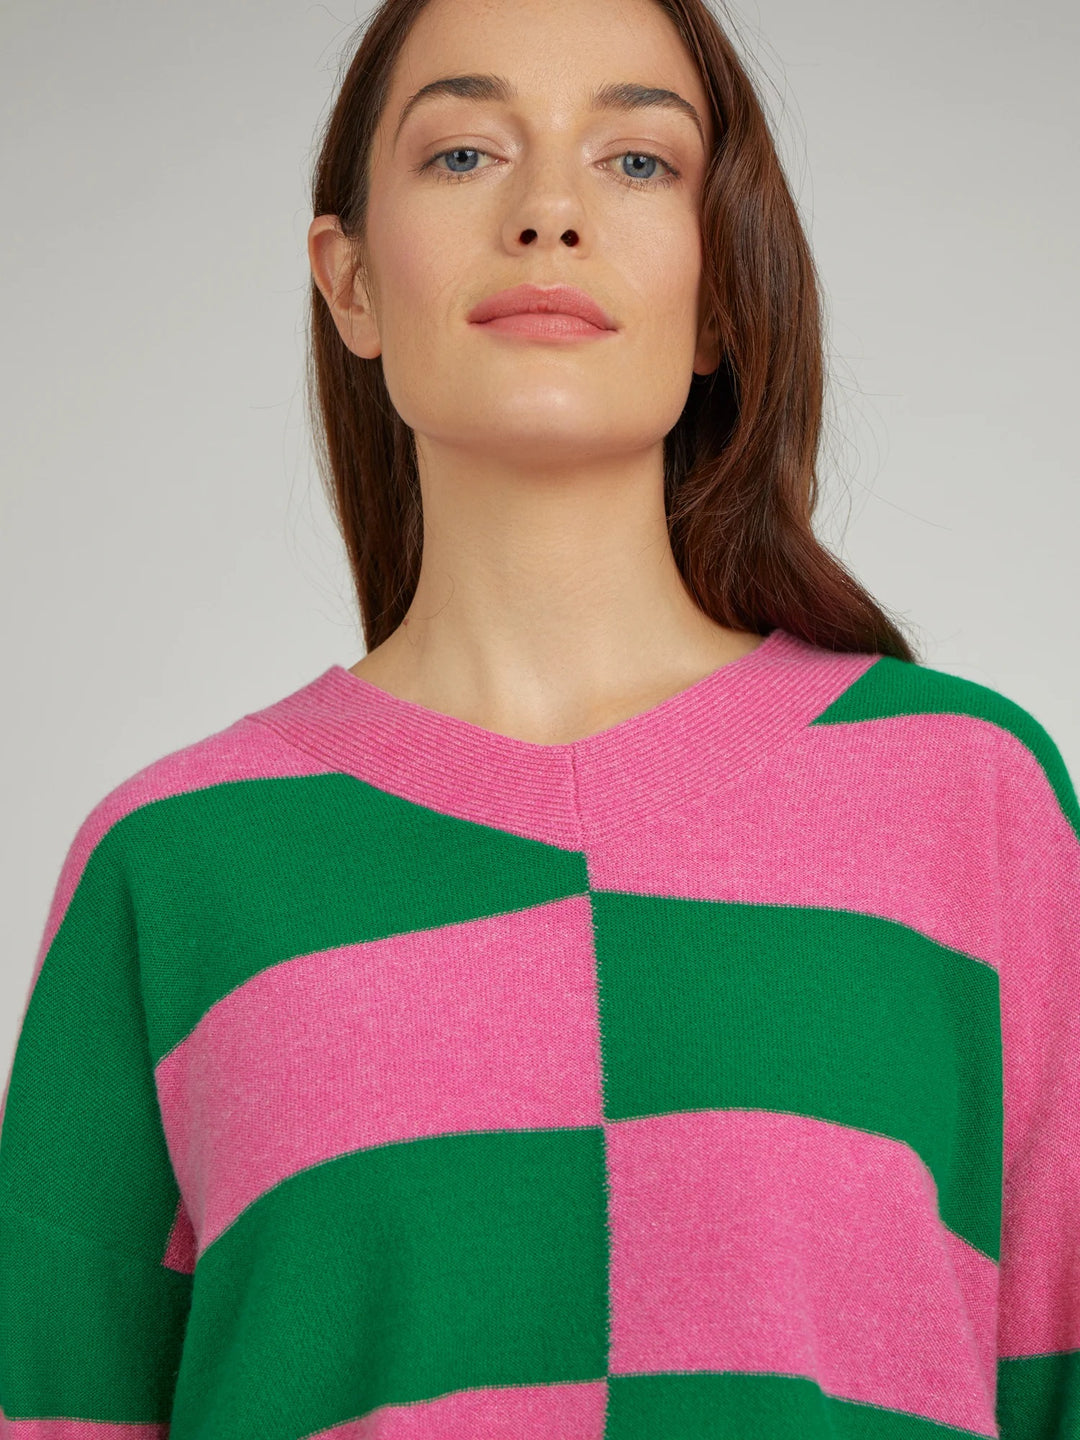 Cocoa Cashmere - This stylish Cashmere Murphy V Neck Sweater is designed to make a statement. Crafted from 100% luxurious cashmere, it features a flattering v-neck, drop shoulders and a stunning battenburg-inspired design.